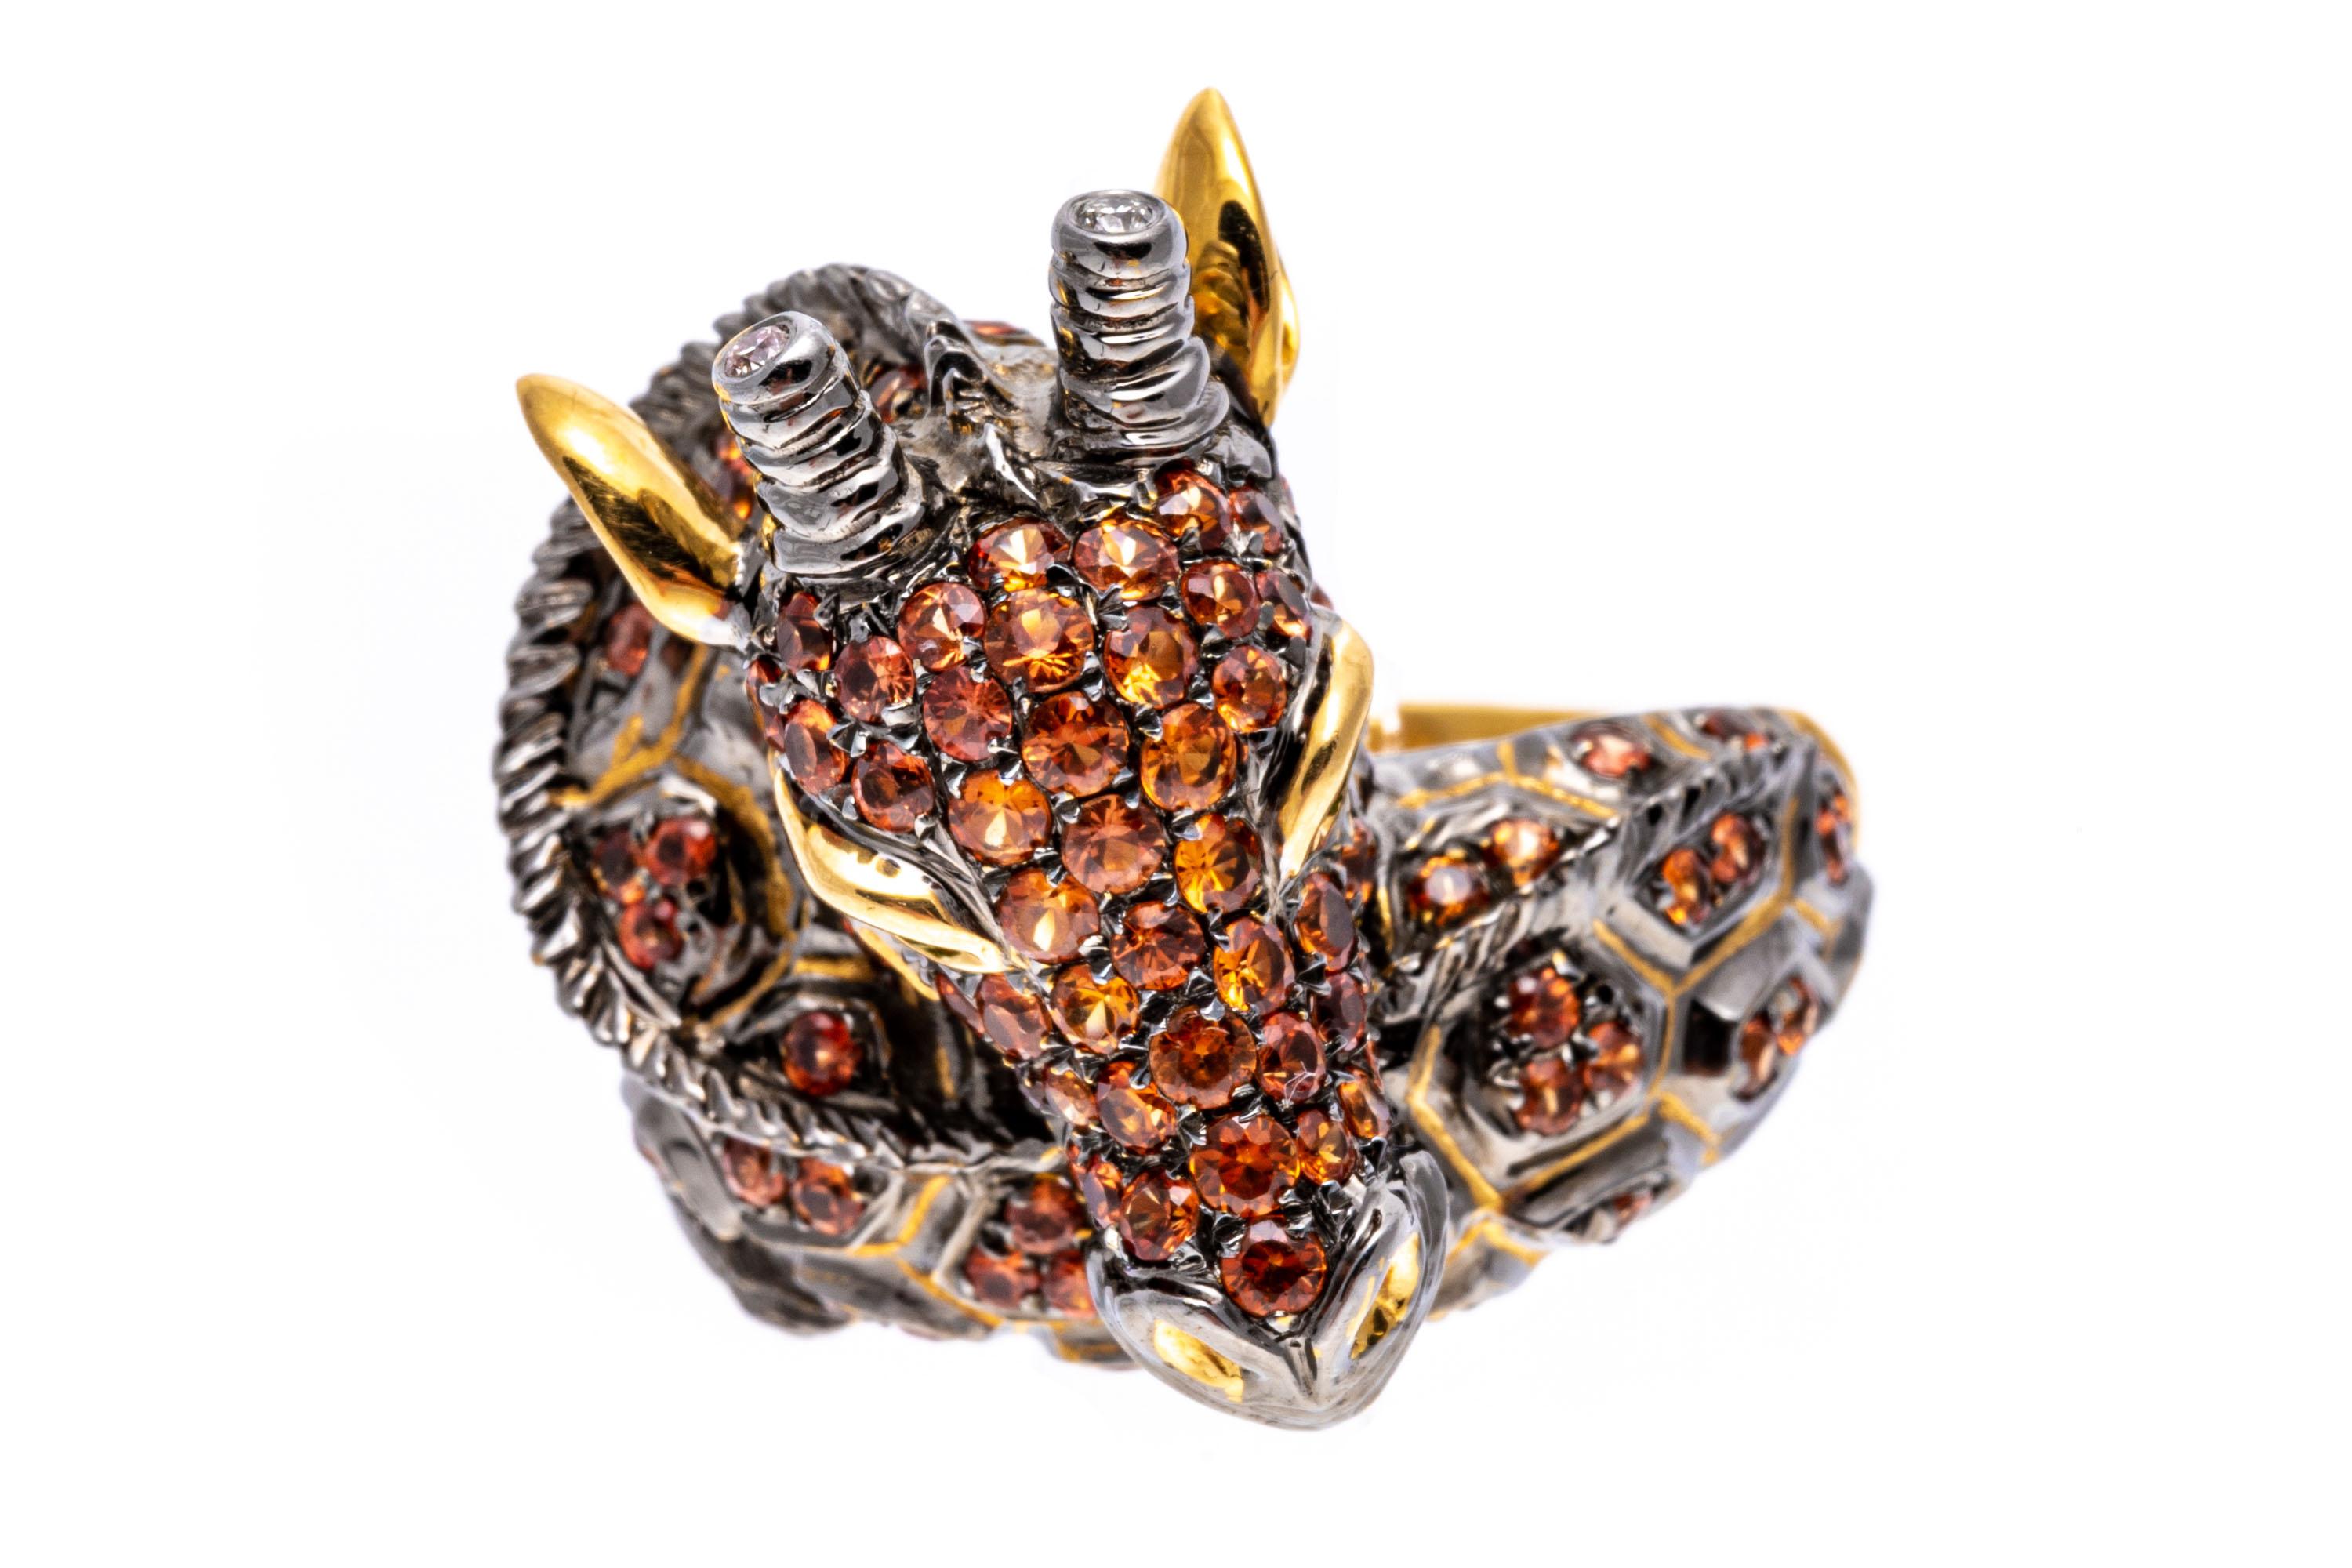 18k Yellow Gold Pave Set Topaz Patterned Figural Giraffe Ring For Sale 3